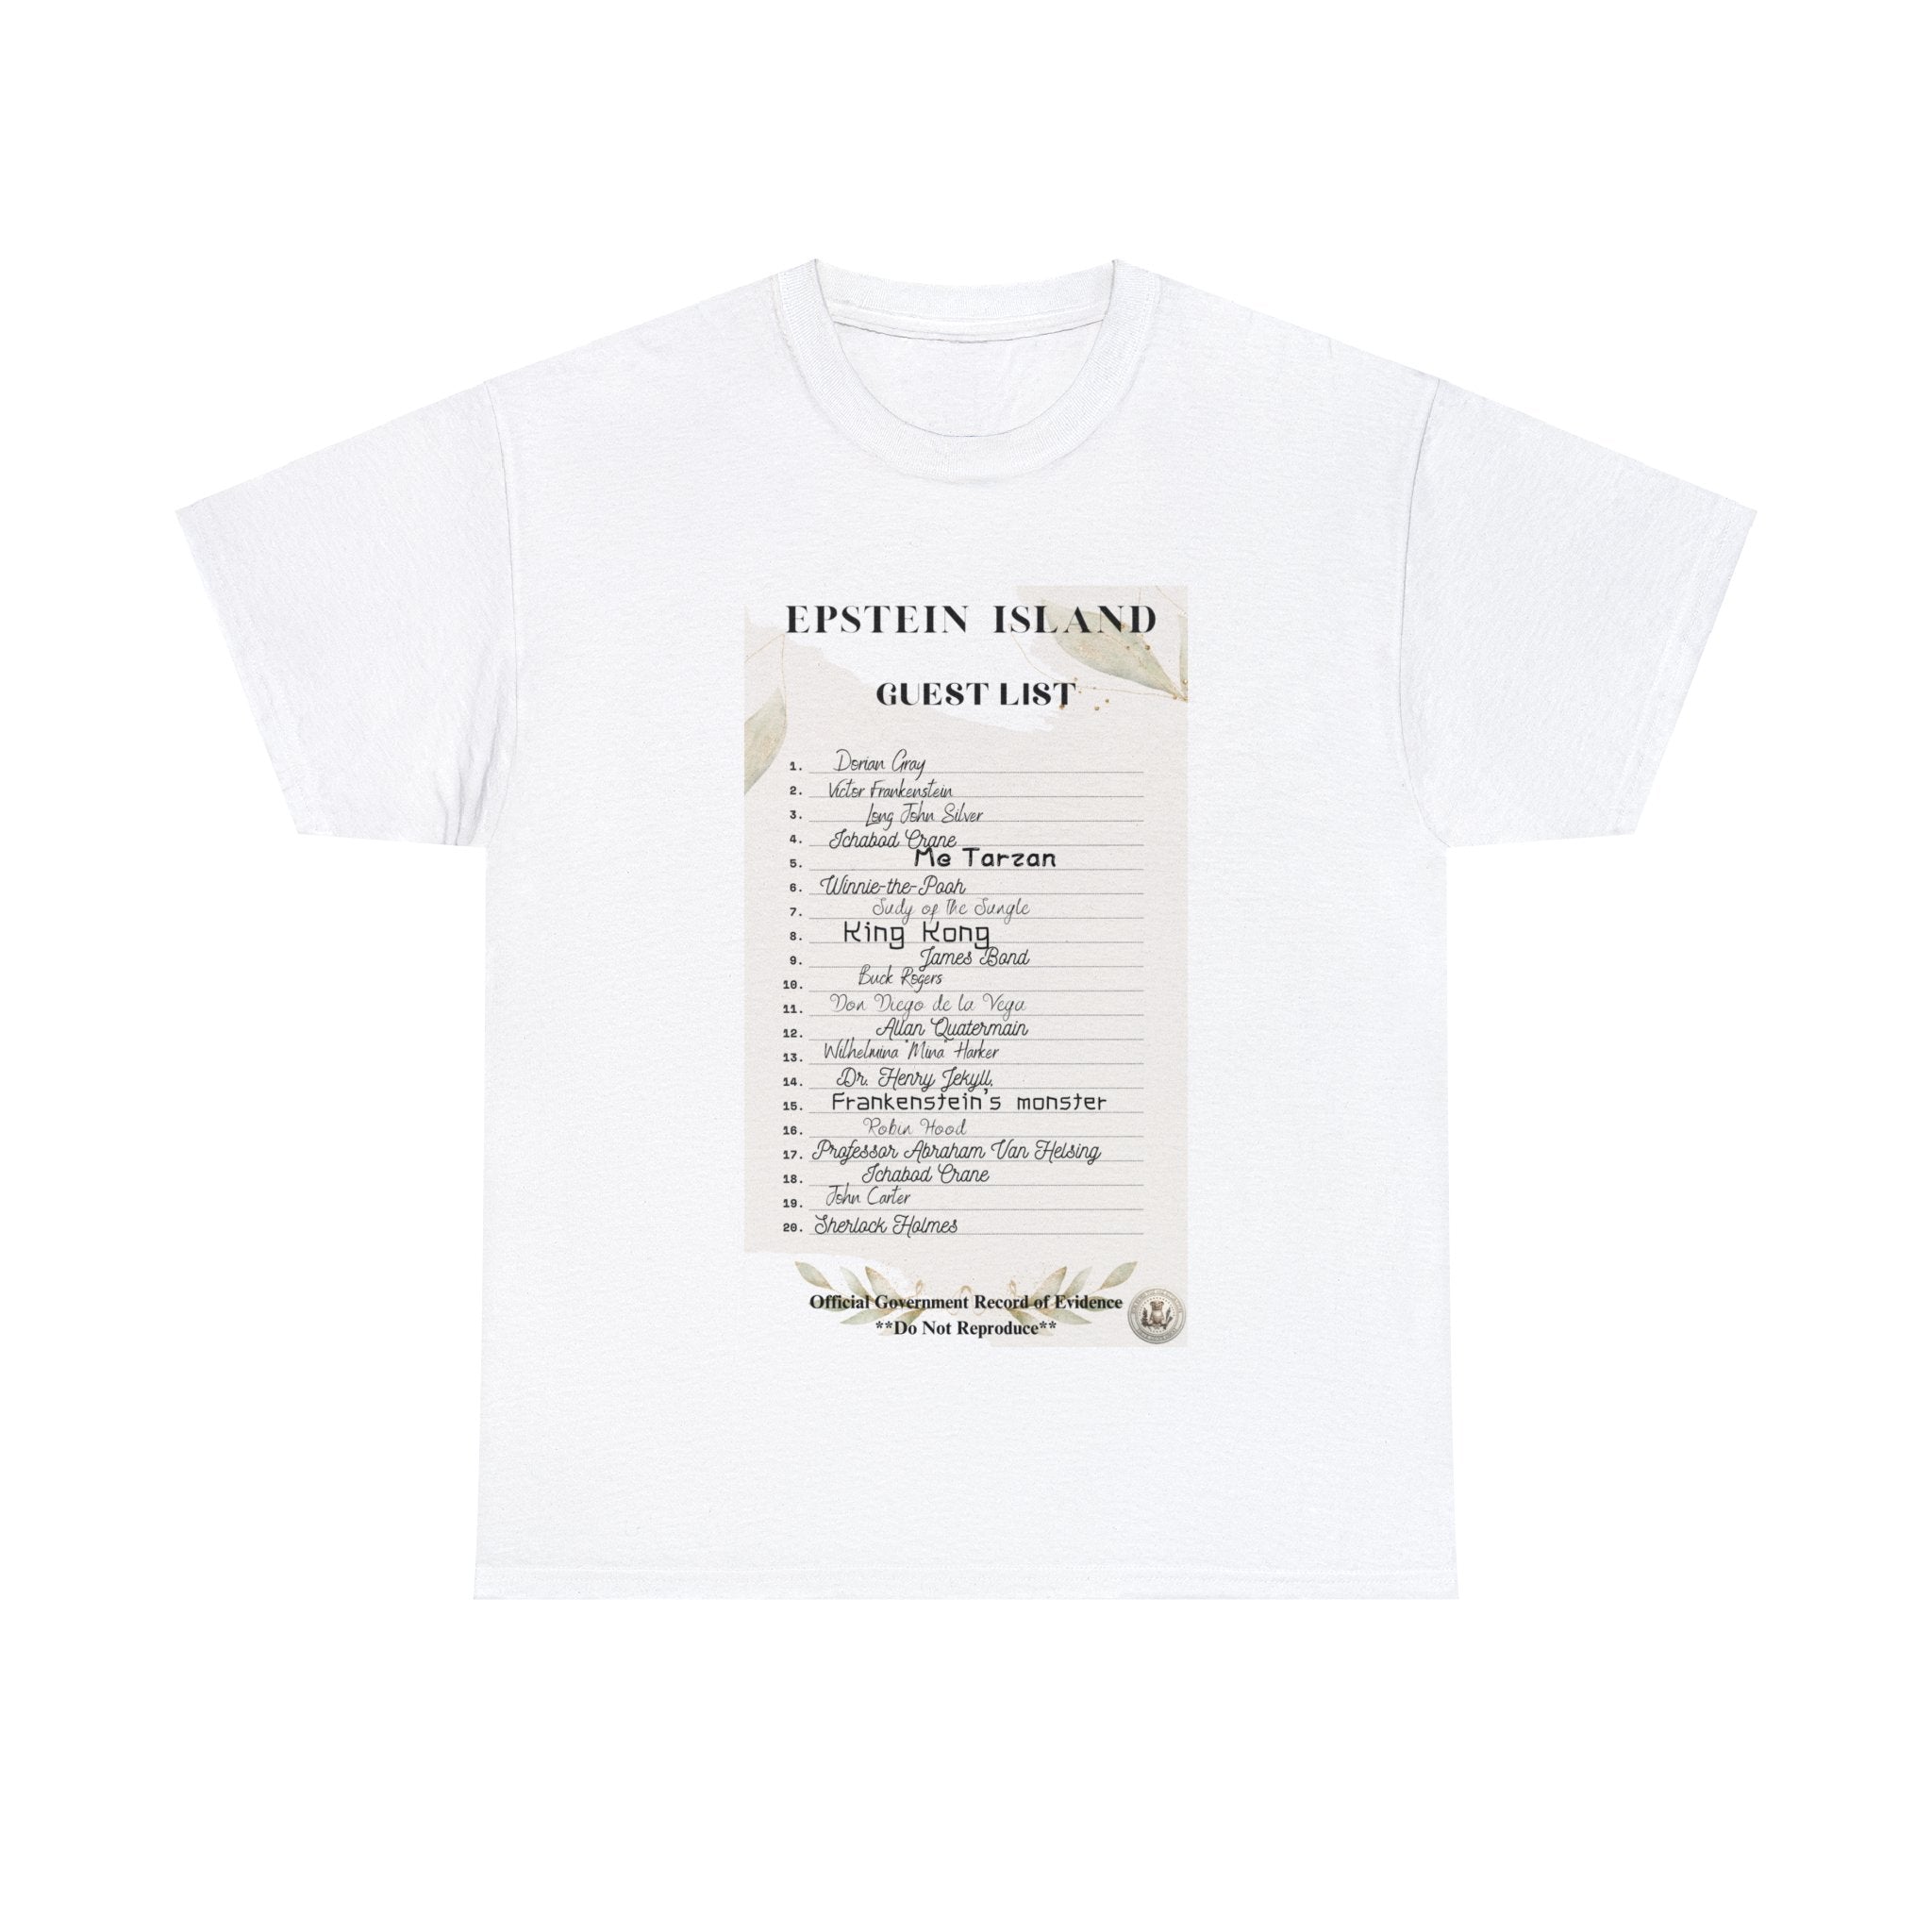 (First Come First Serve - Limited Supply) Creepy Island Baron Guest List" Funny Parody Unisex Heavy Cotton Tee Funny T-Shirt of E-Island Guest List Funny Shirt for Him for Funny Events